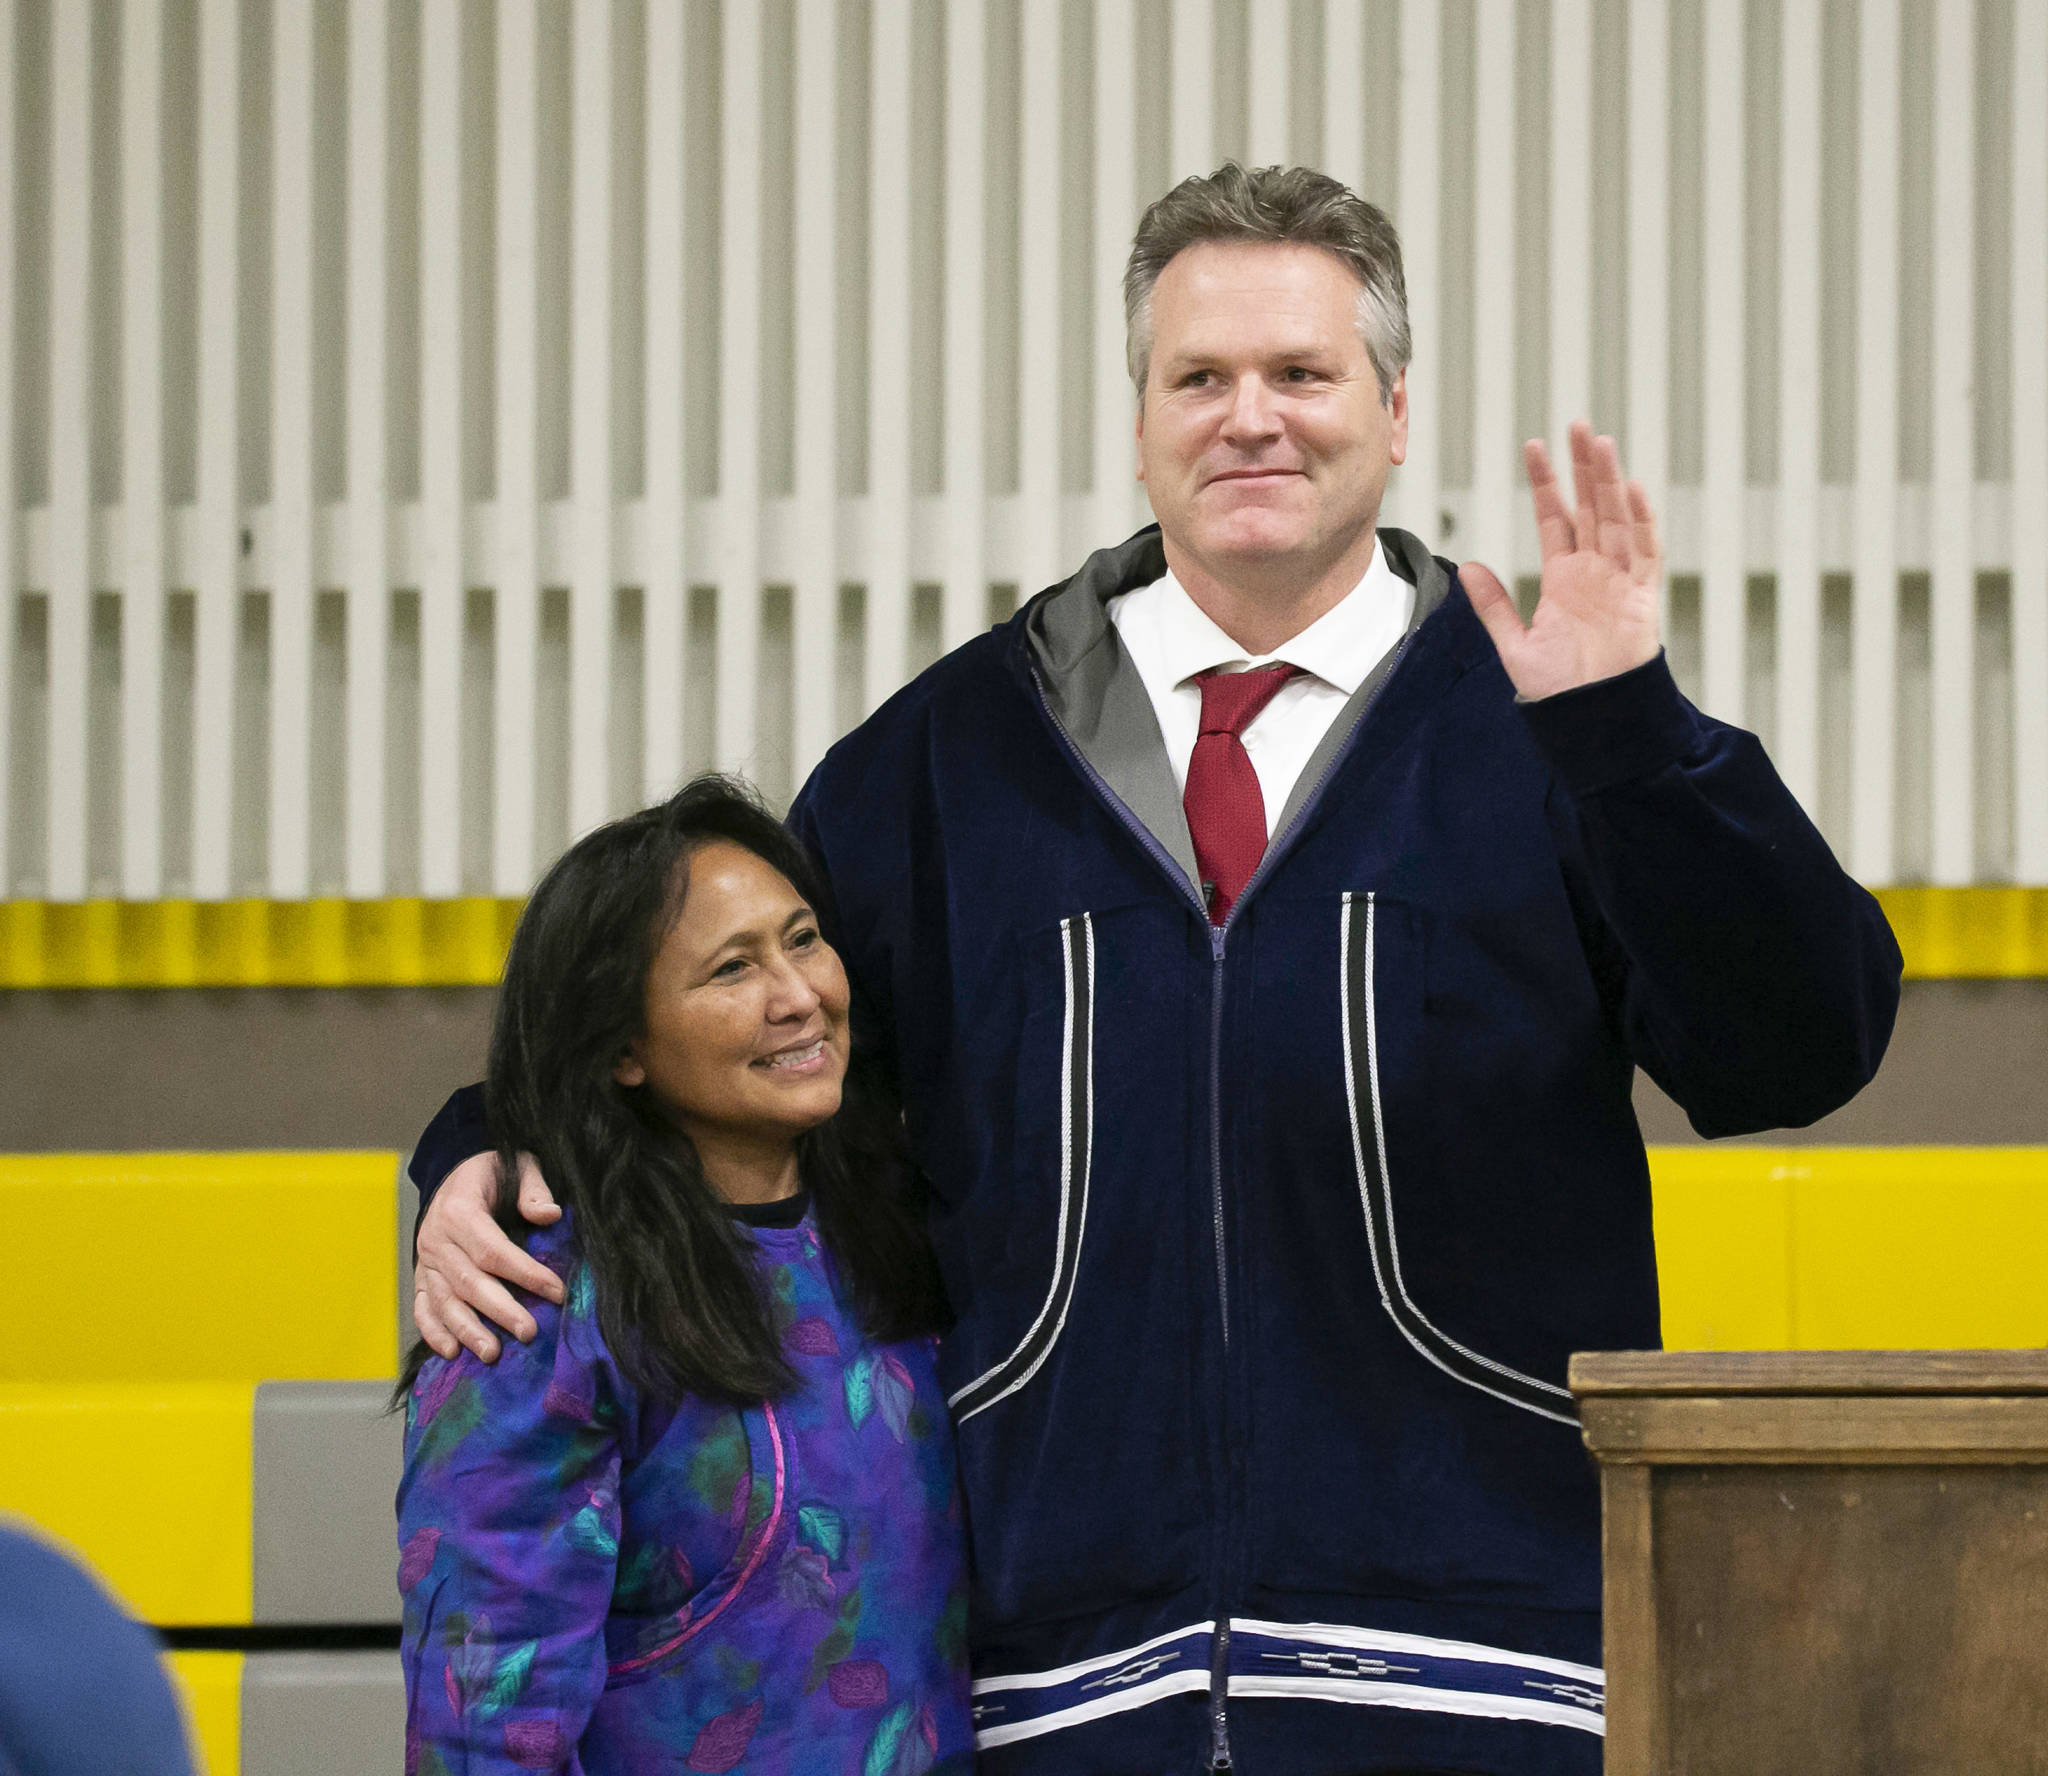 Alaska Gov. Mike Dunleavy poses with first lady Rose Dunleavy after he was sworn into office Monday, Dec. 3, 2018, in Kotzebue, Alaska. He had originally planned the ceremony in her hometown of Noorvik, Alaska, but poor weather prevented his plane from landing there and the ceremony was moved to Kotzebue.(Stanley Wright/Alaska Governor’s Office via AP)